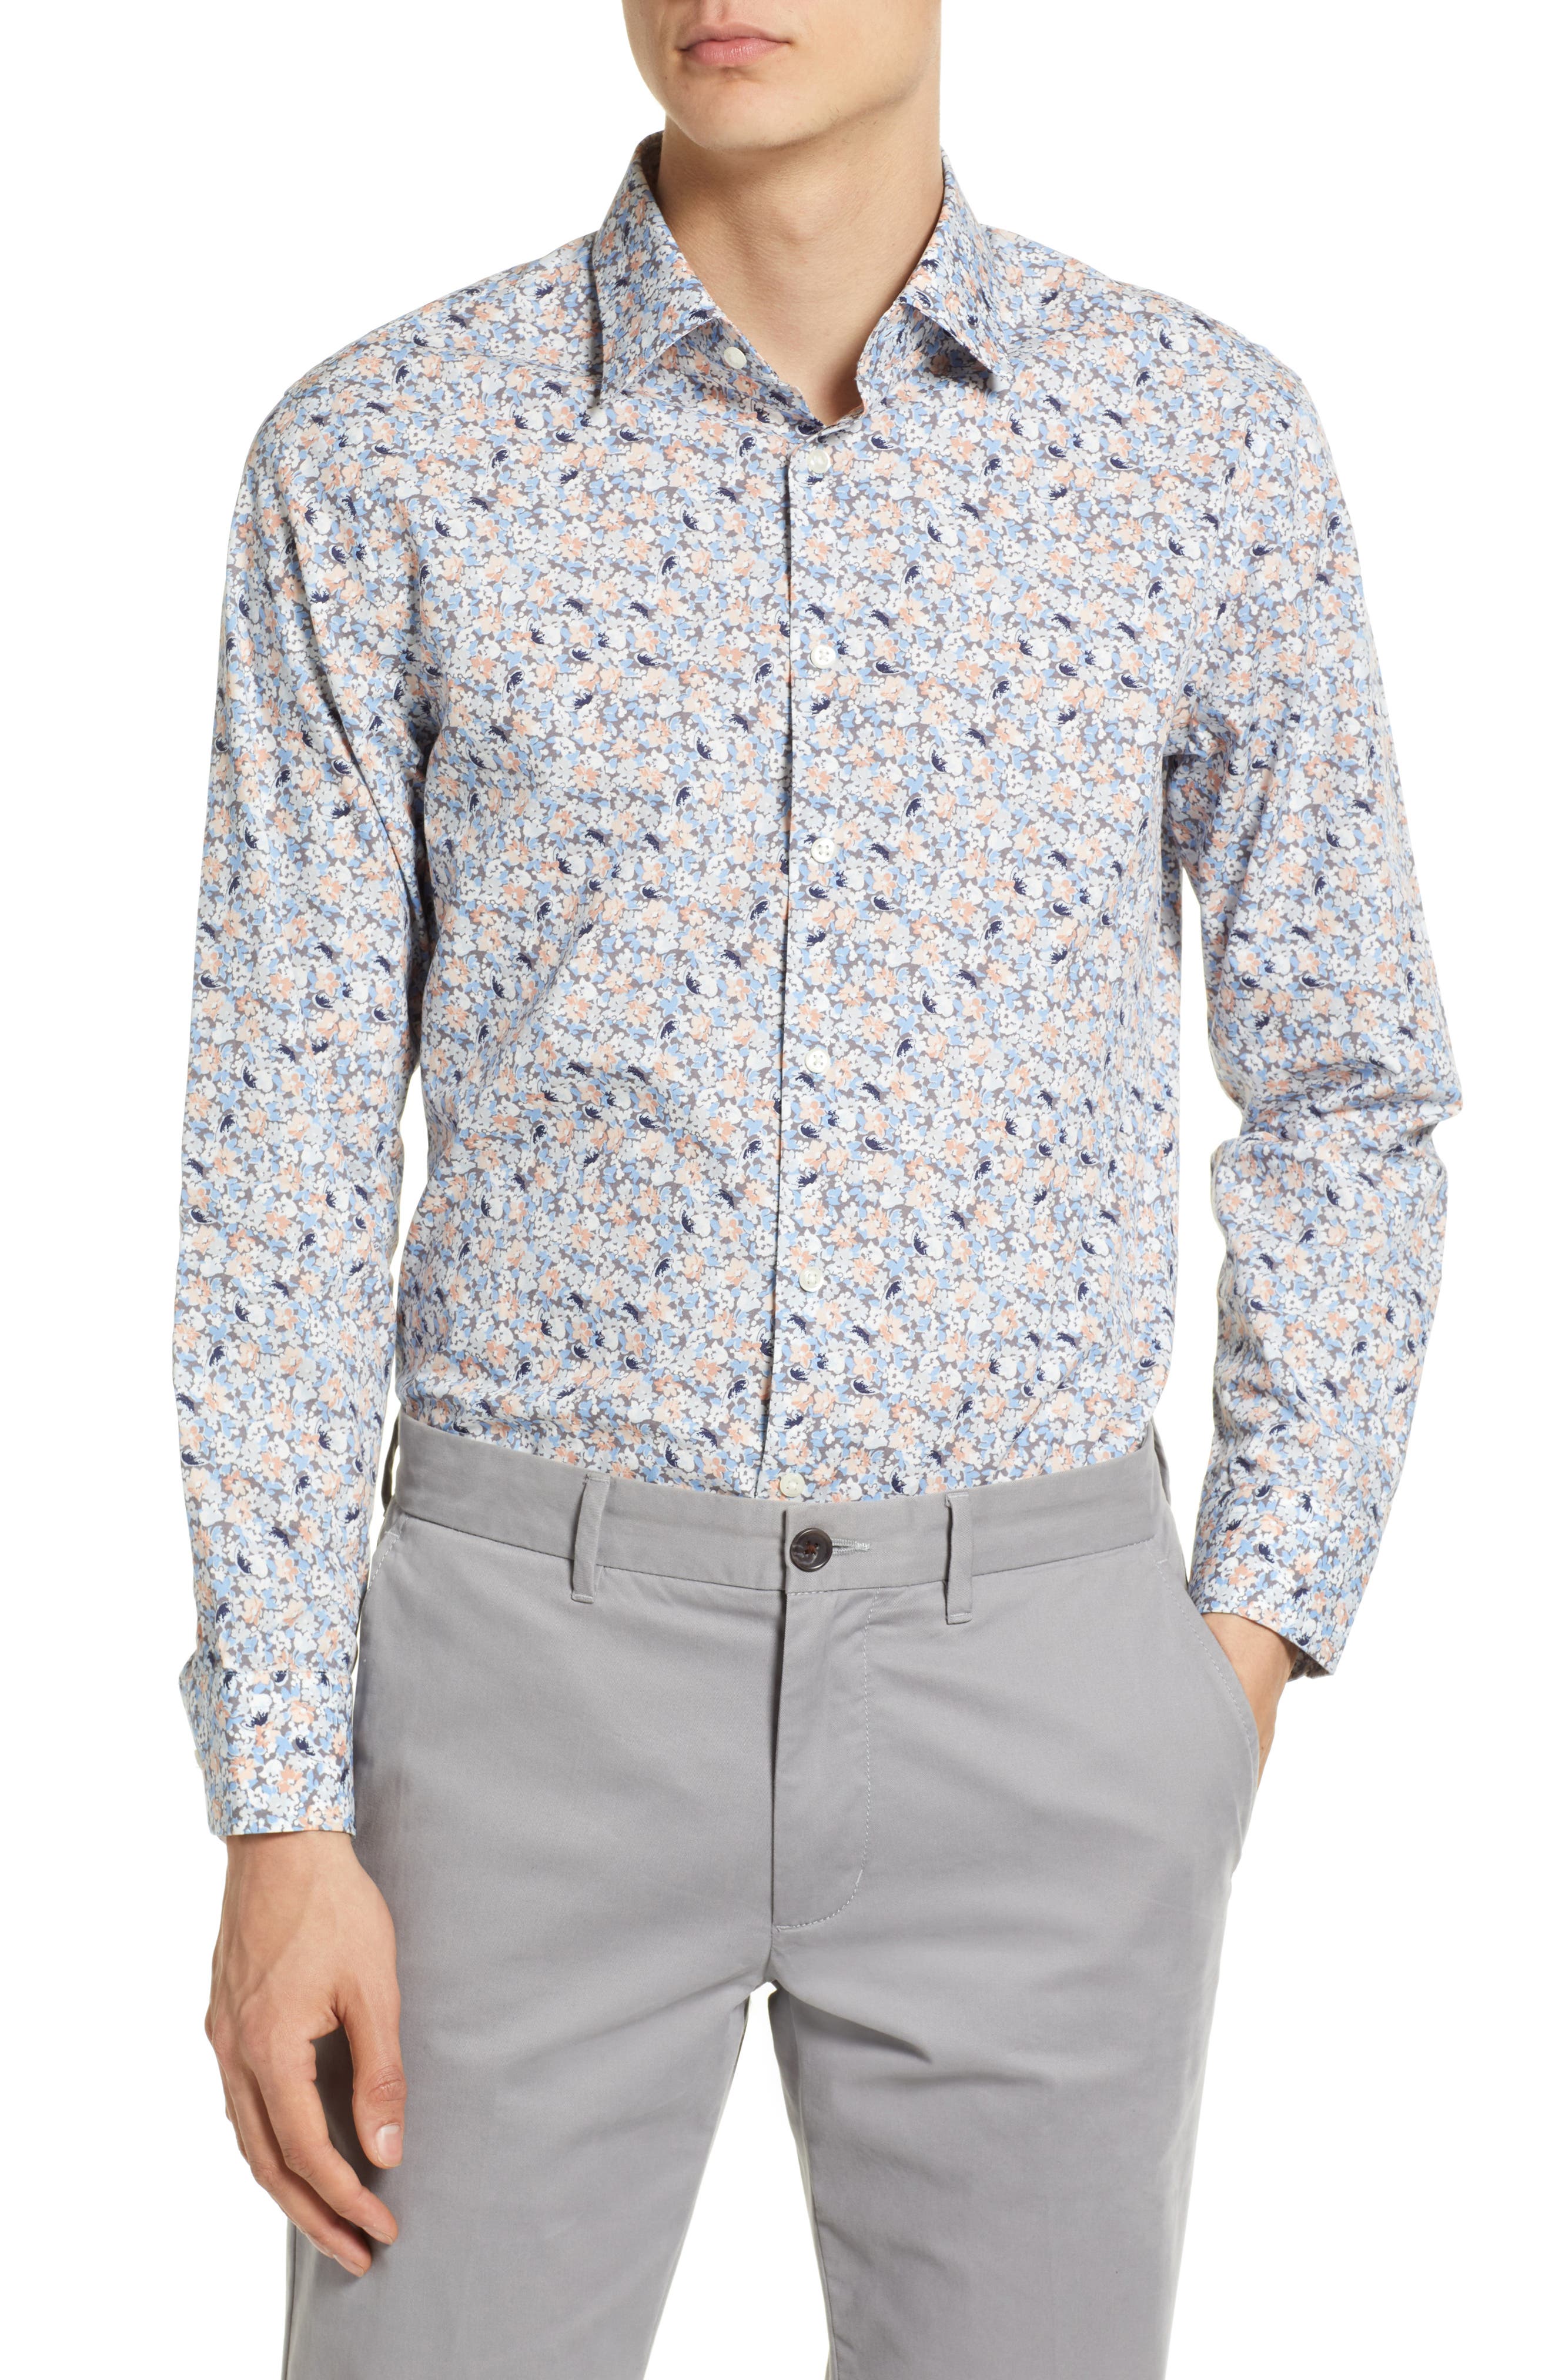 Domple Mens Floral Club Retro Regular Fit Long Sleeve Button Down Blouse Shirt Tops